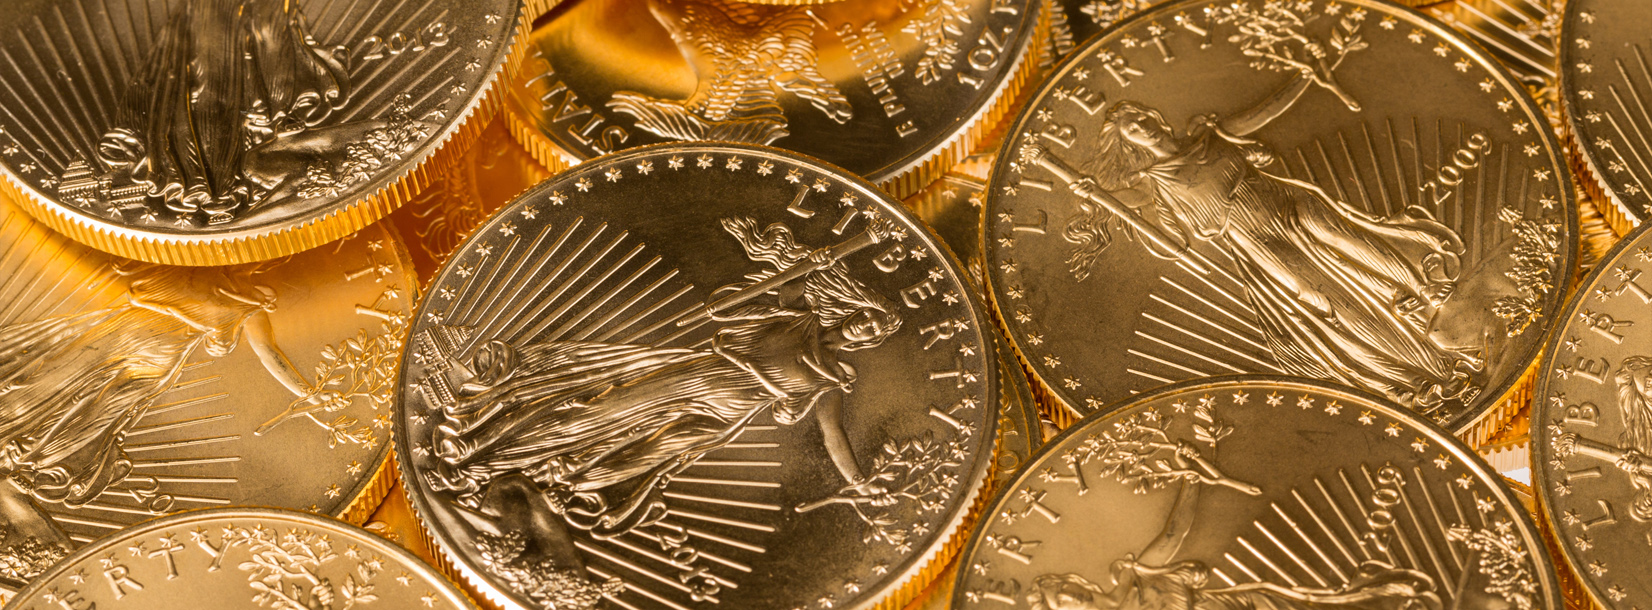 U.S. gold coin sales slide as stock markets show more luster